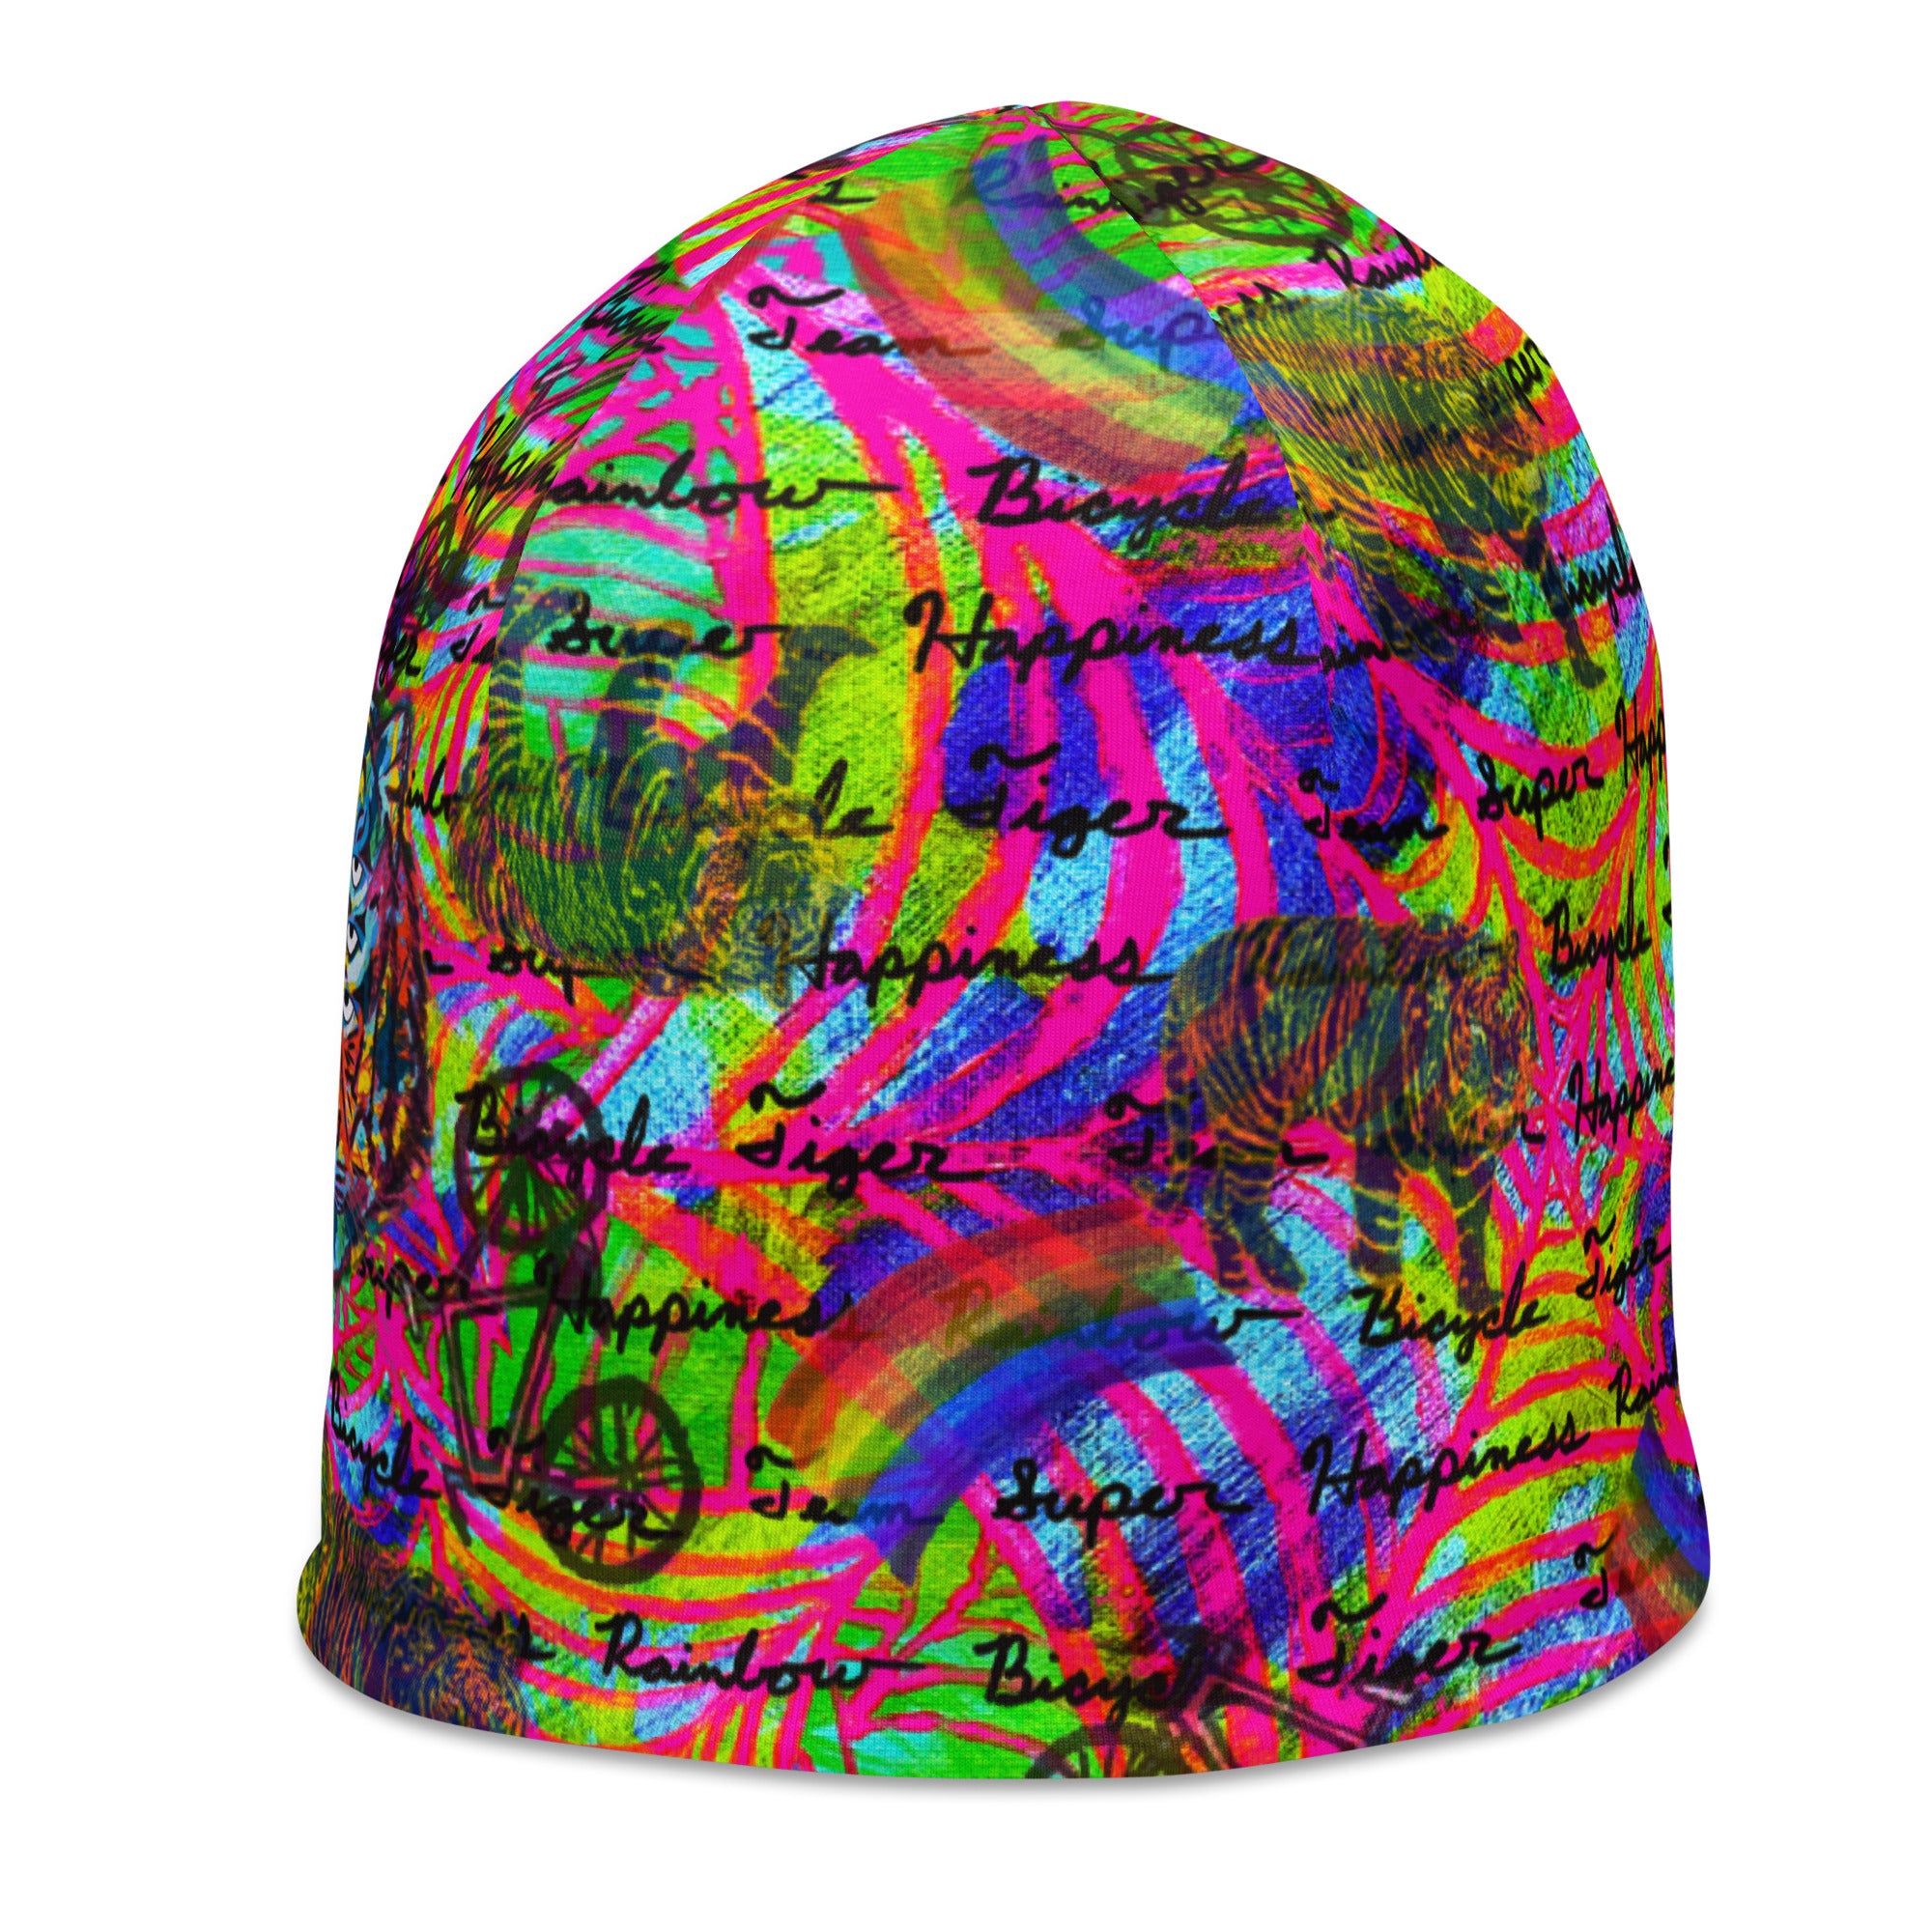 TEAM SUPER HAPPINESS RAINBOW BICYCLE TIGER All-Over Print Beanie